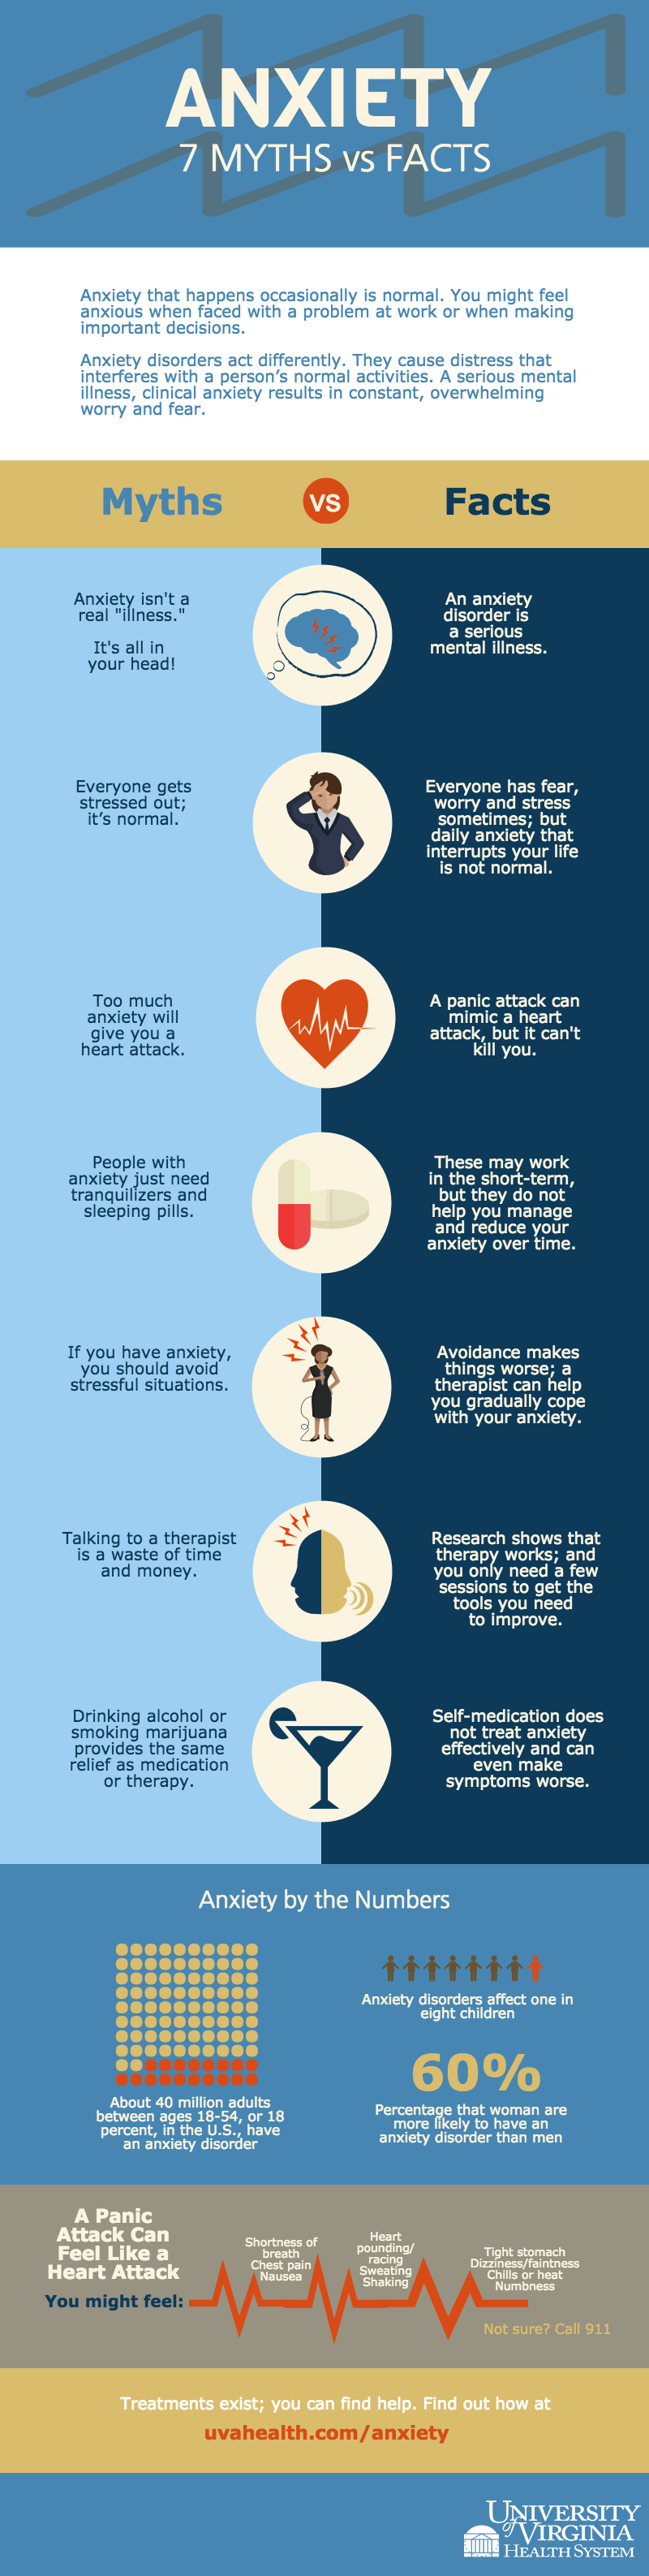 anxiety disorders infographic myths & facts